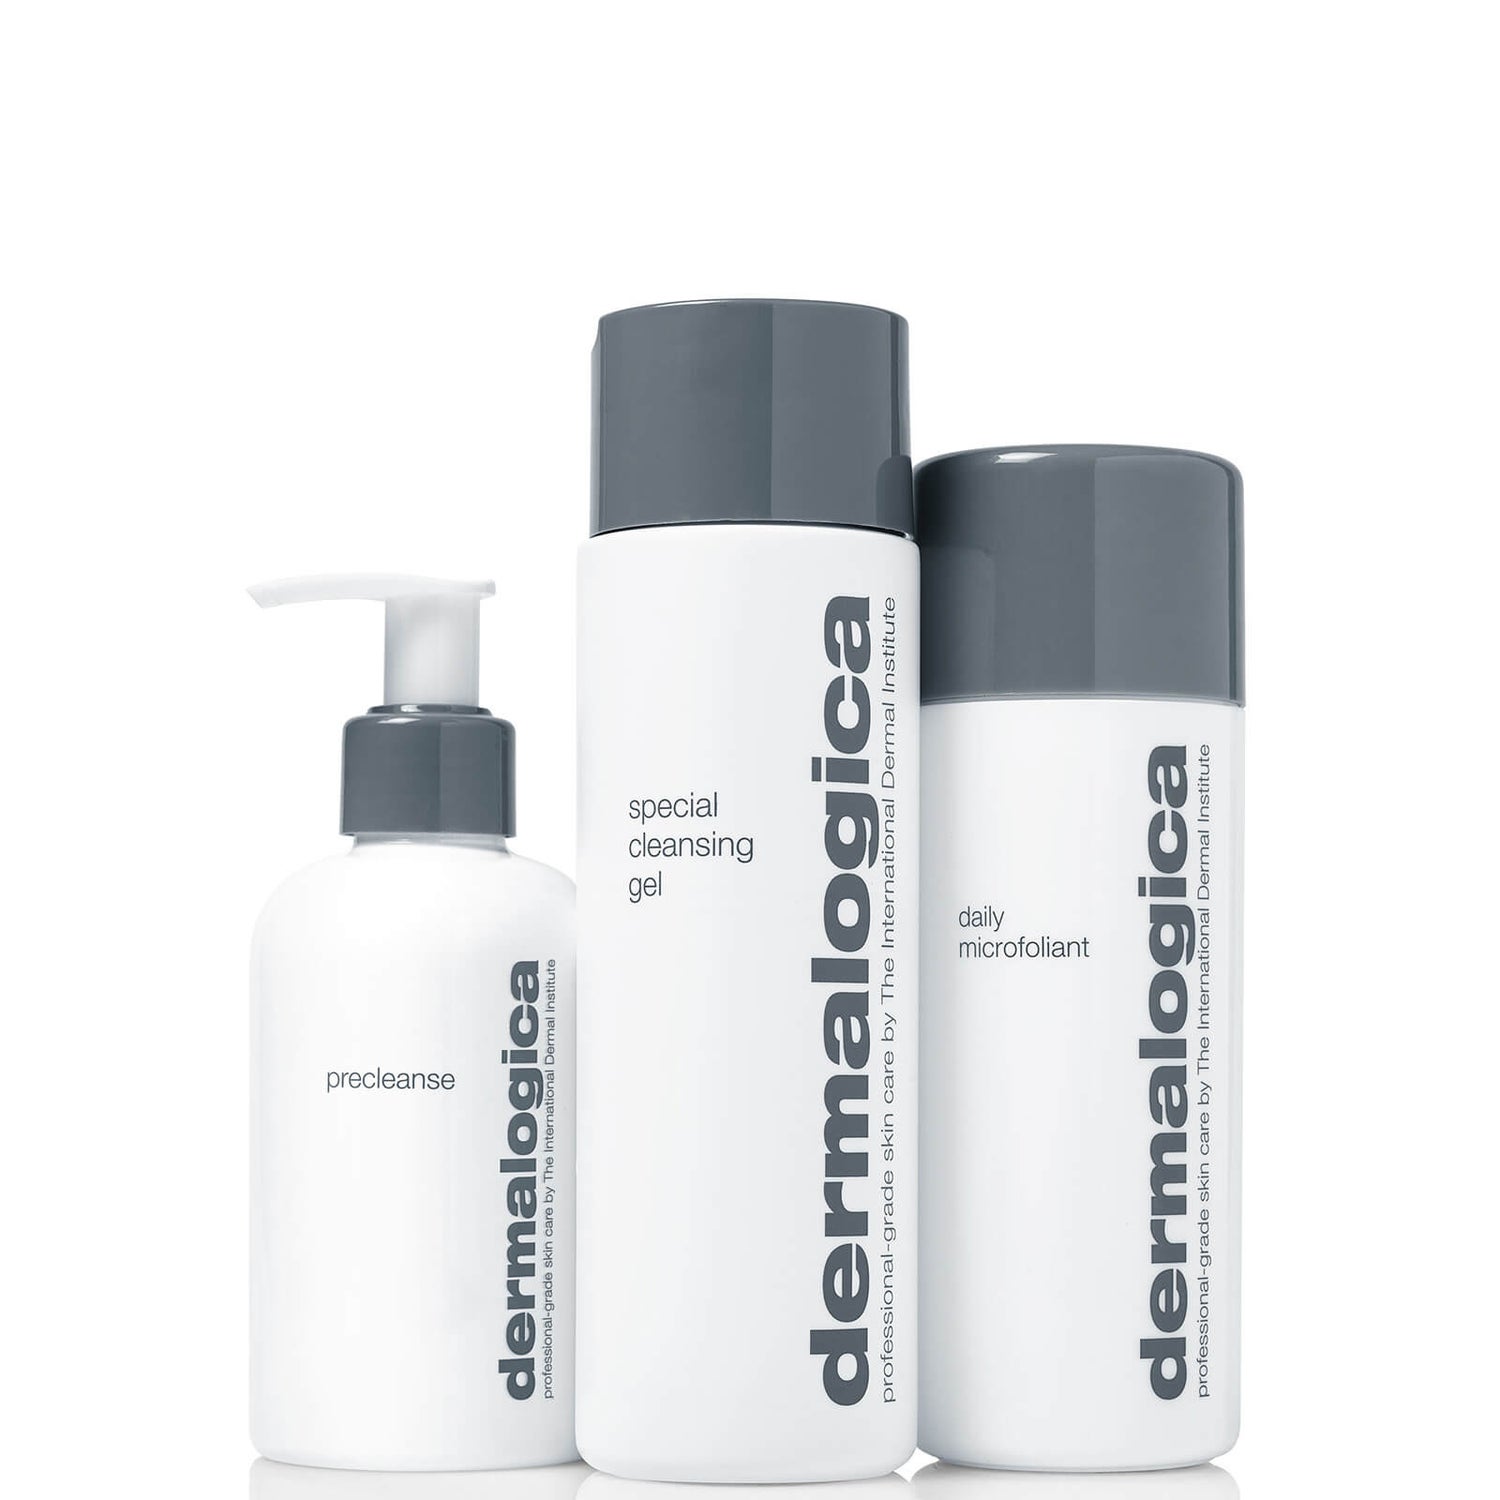 Dermalogica Our Best Cleanse and Glow - $143.00 Value